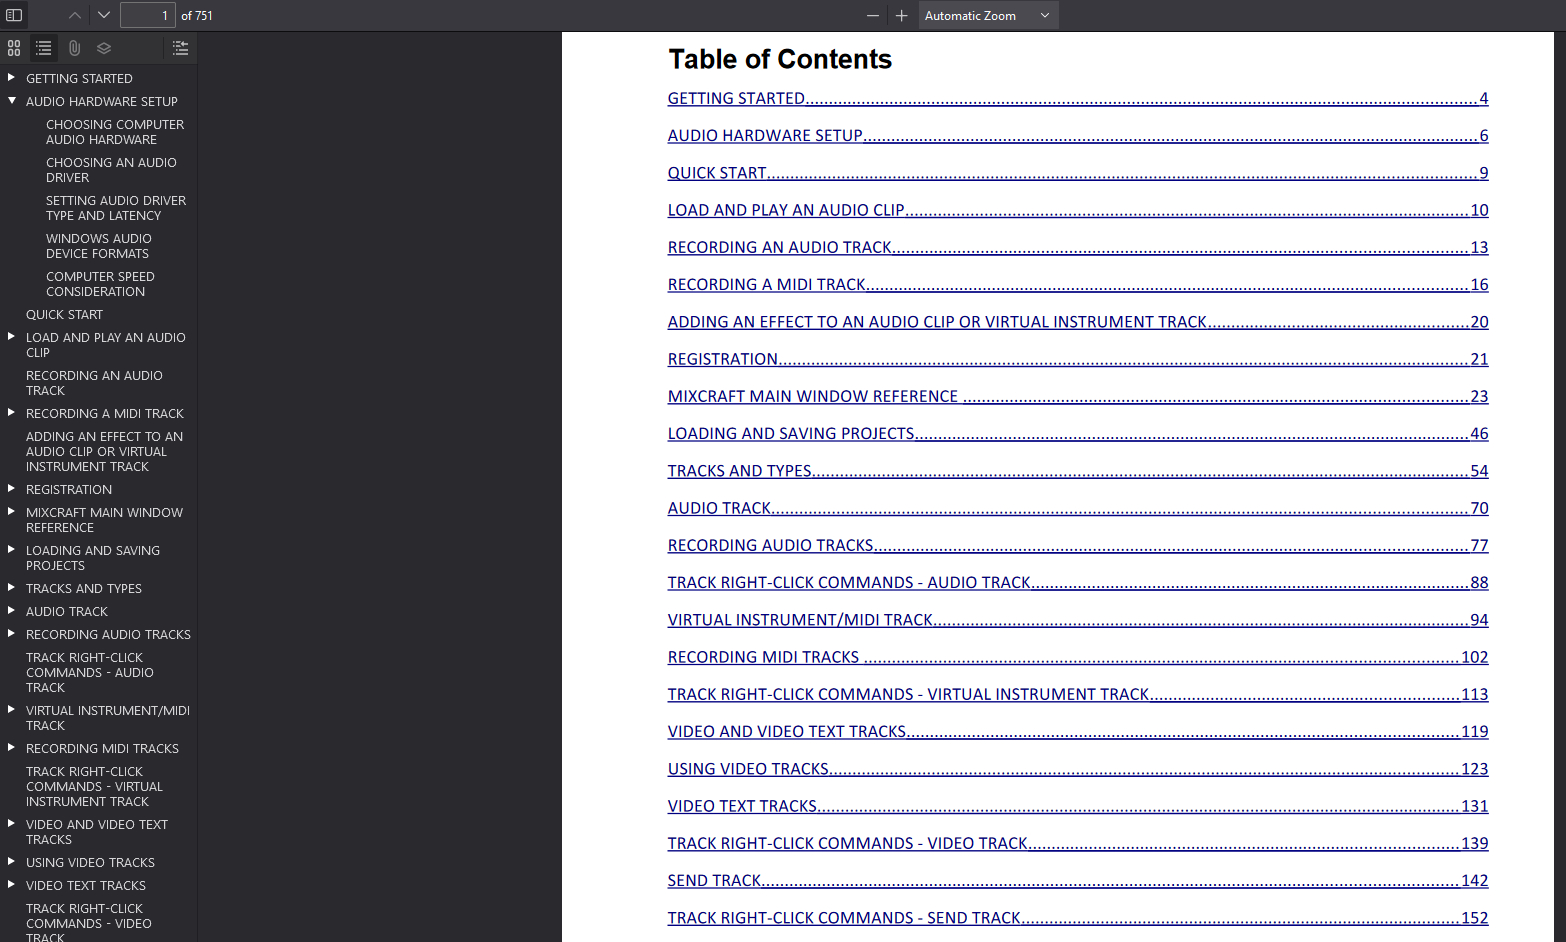 MX10 manual with table of contents.jpg